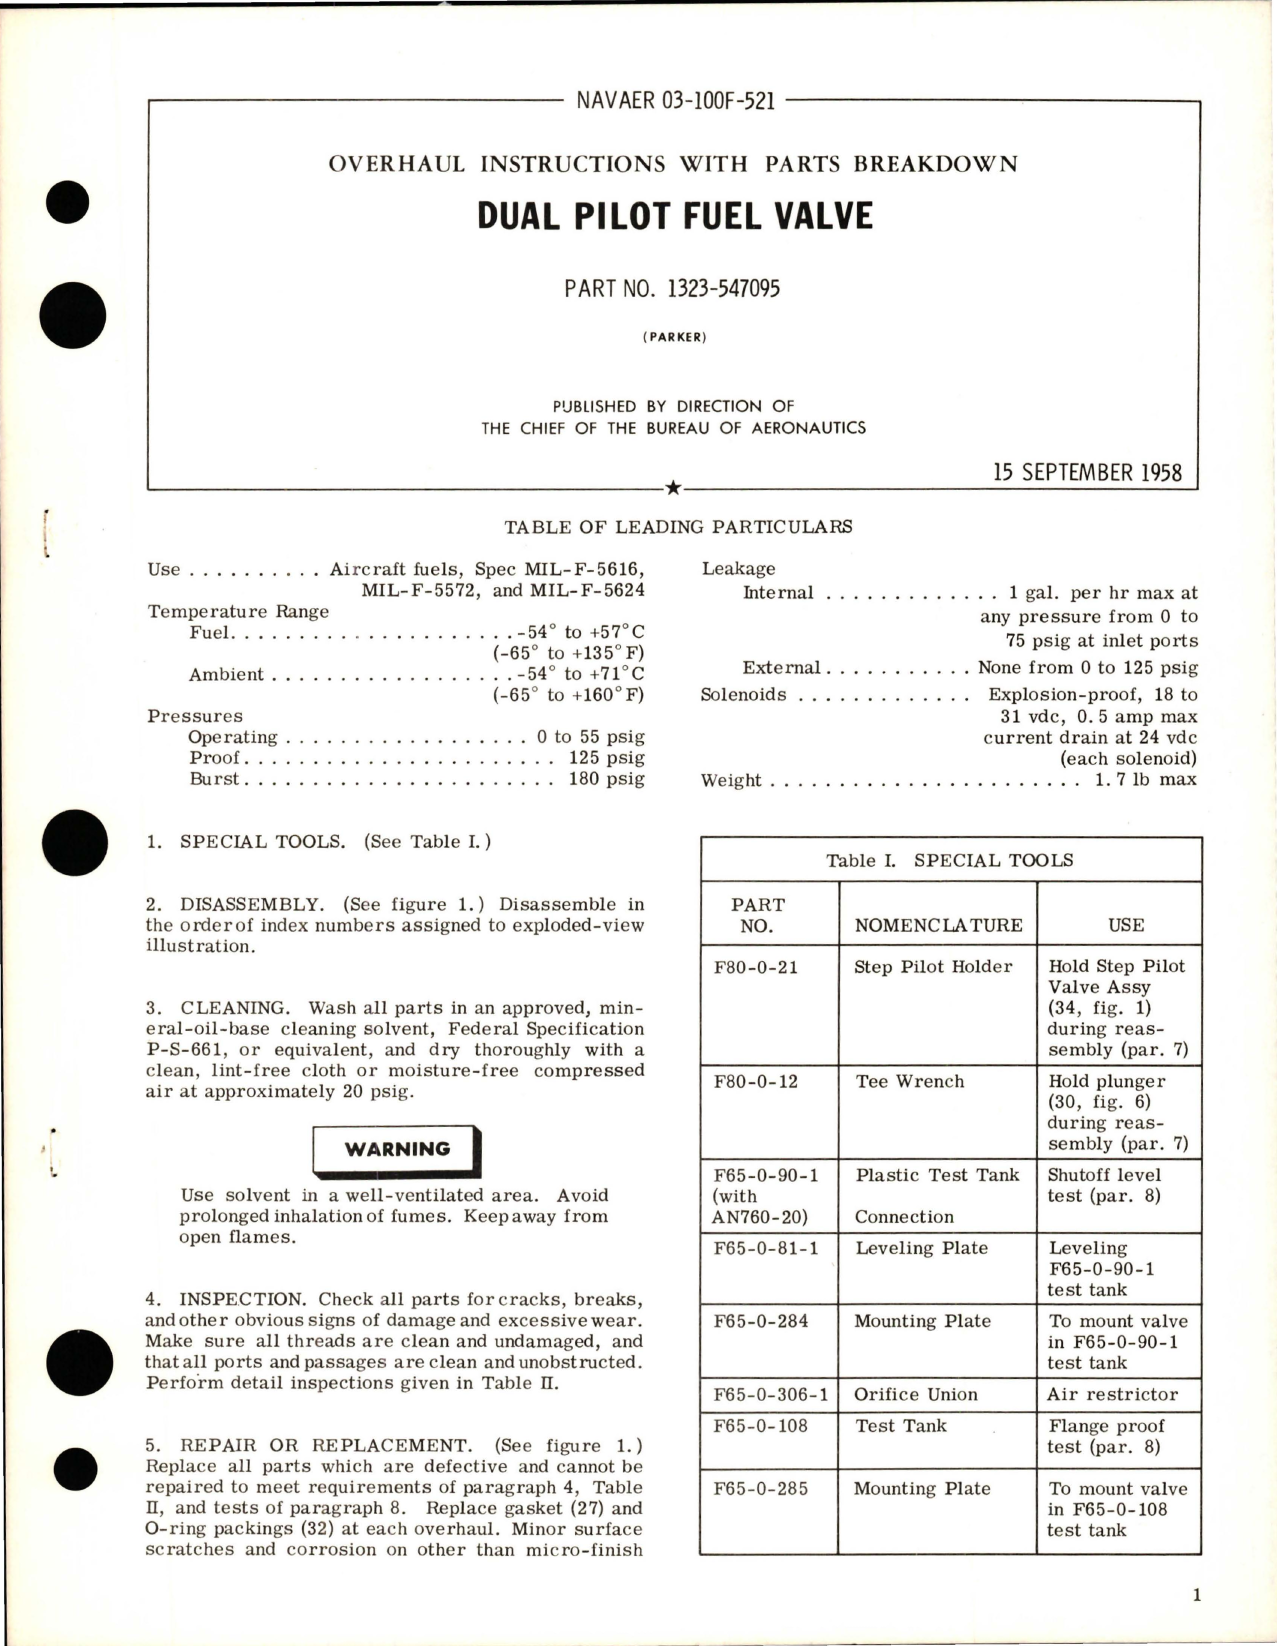 Sample page 1 from AirCorps Library document: Overhaul Instructions with Parts Breakdown for Dual Pilot Fuel Valve - Part 1323-547095 